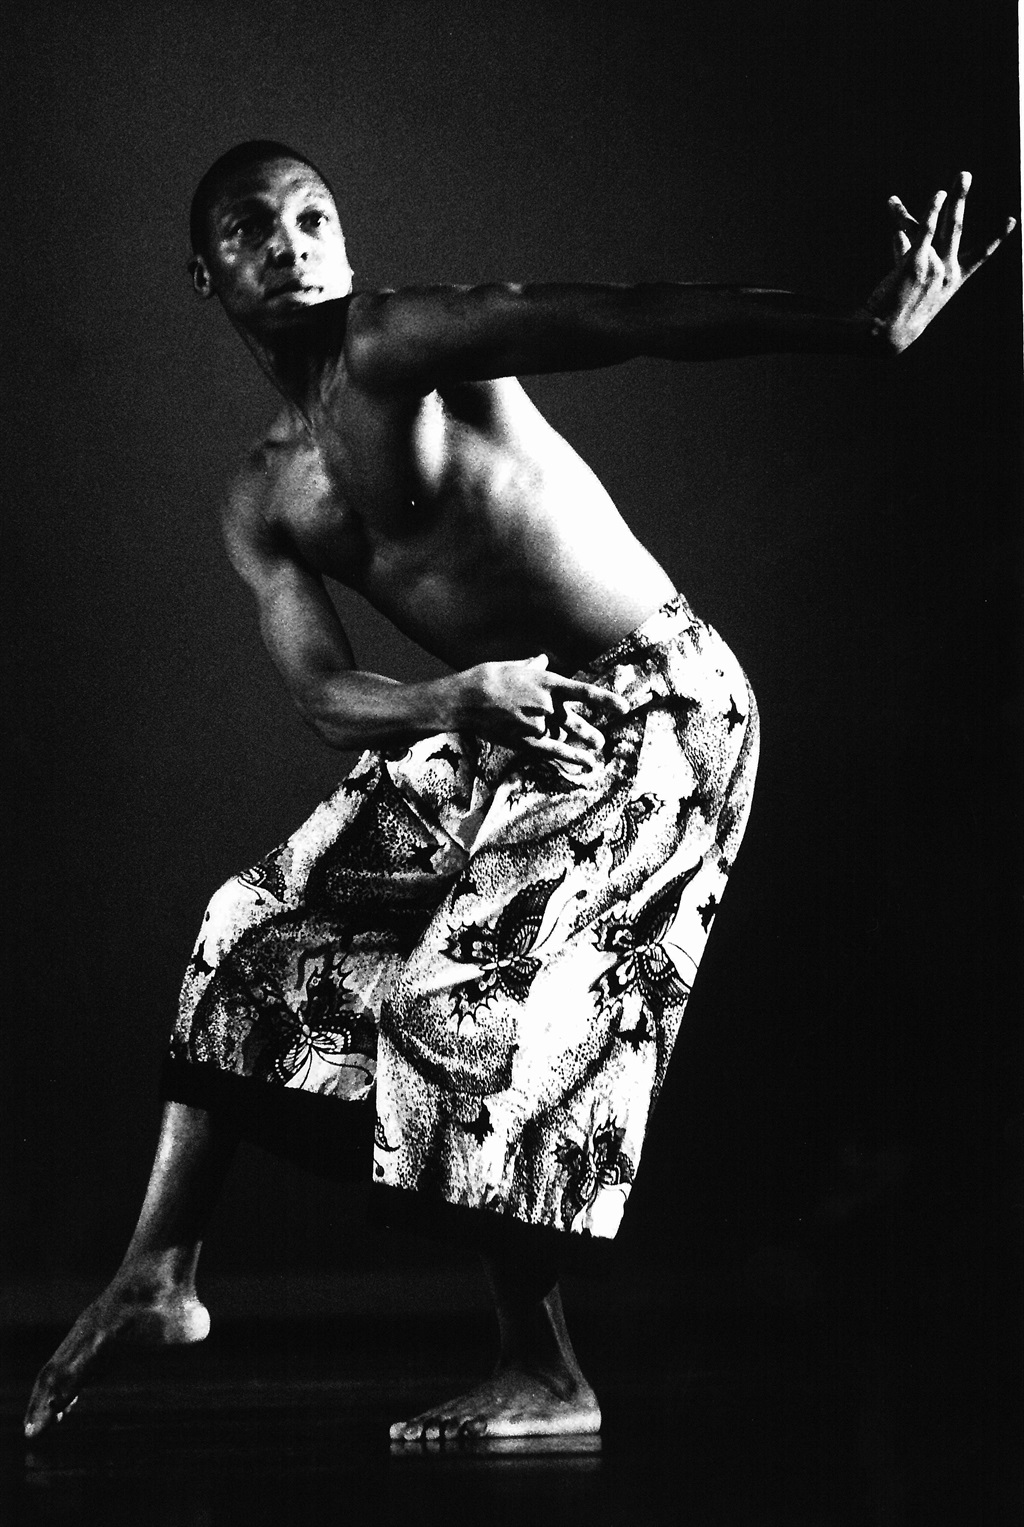 VINCENT MANTSOE A choreographer who broke through from street dancing to the stage as democracy dawned, Mantsoe went on to be the global face of South African dance’s new school. Dance Umbrella provided his first platform and he emerged with sinewy new-school solo works that acknowledged the role of tradition and the ancestors in his creative process. He is pictured here performing his breakout work Gula (1993). Picture: Mothlalife Mahlaba